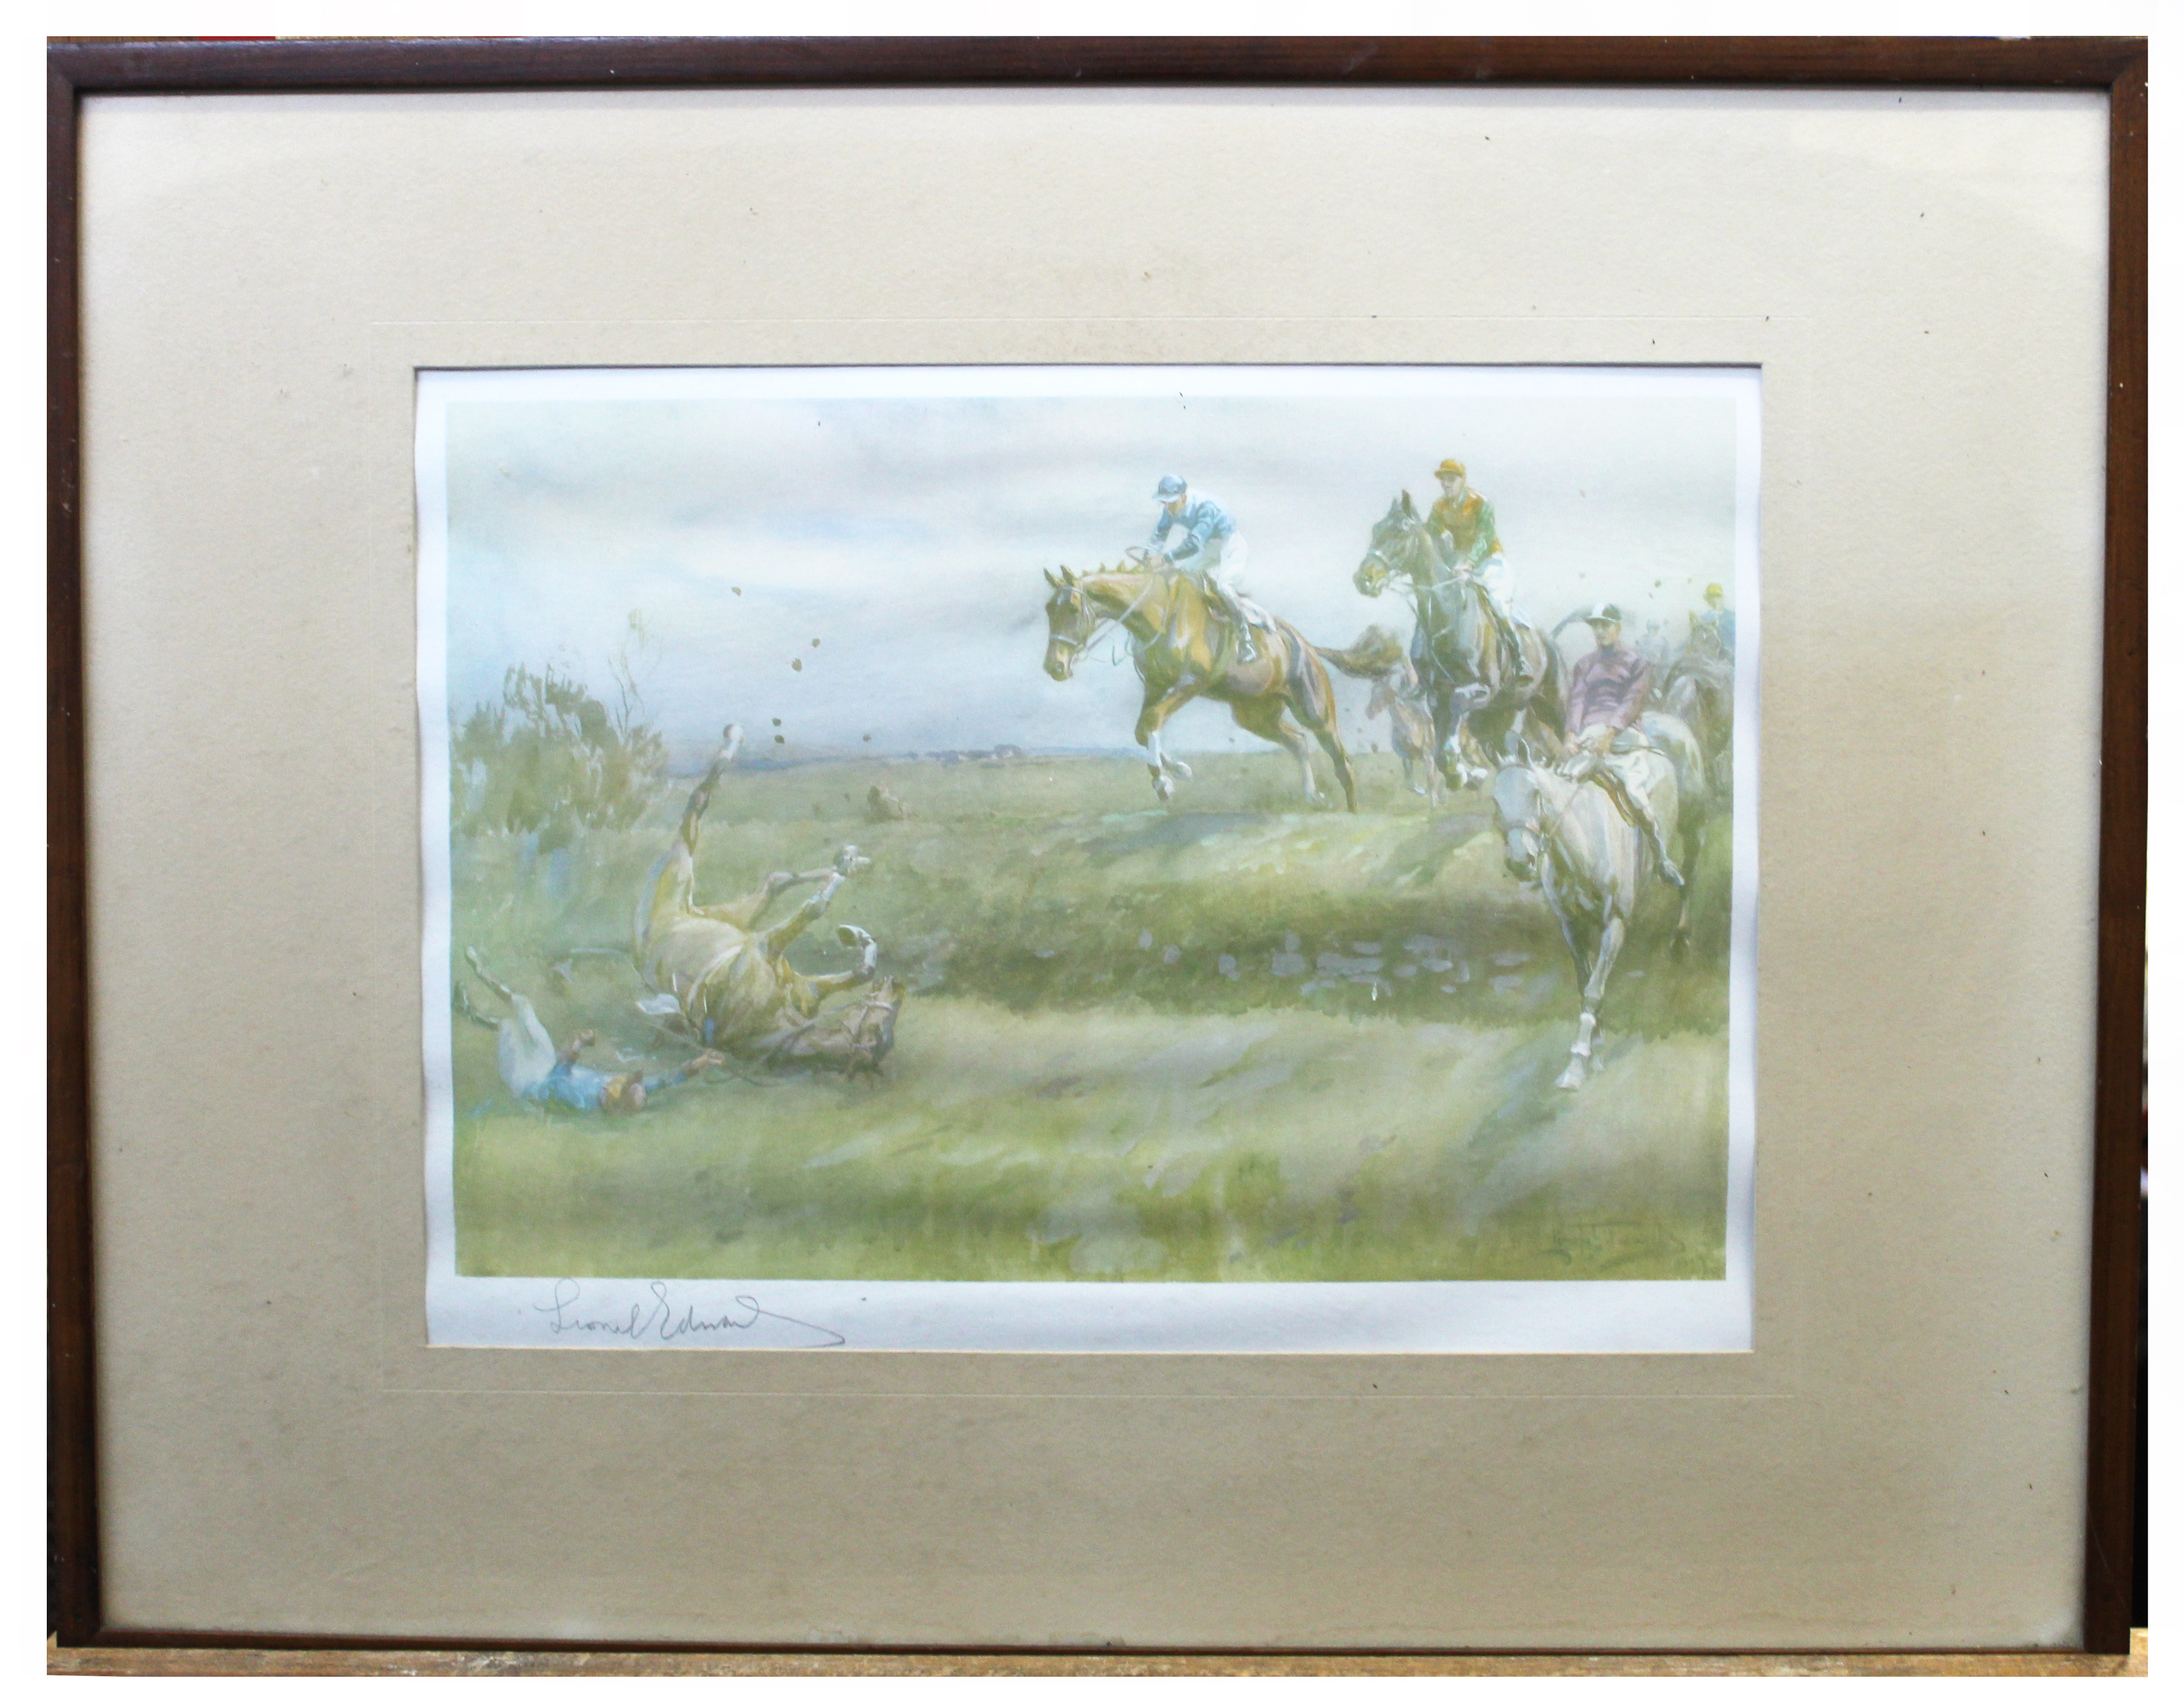 Lionel Dalhousie Robertson Edwards (1878-1966), "Punchestown - Jumping a Big Bank", coloured